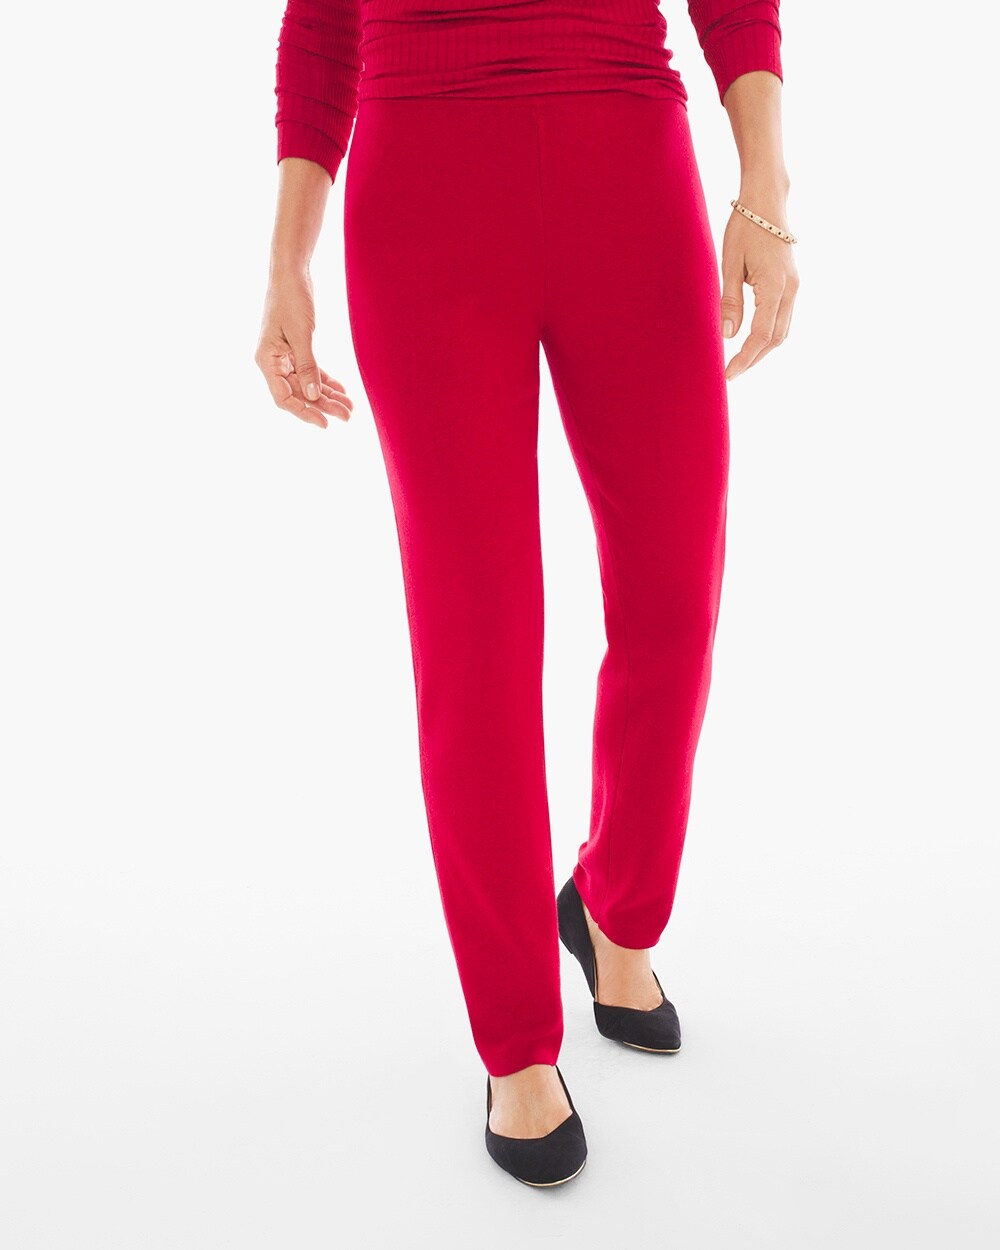 Zenergy Cotton Cashmere Ribbed Pants in Renaissance Red